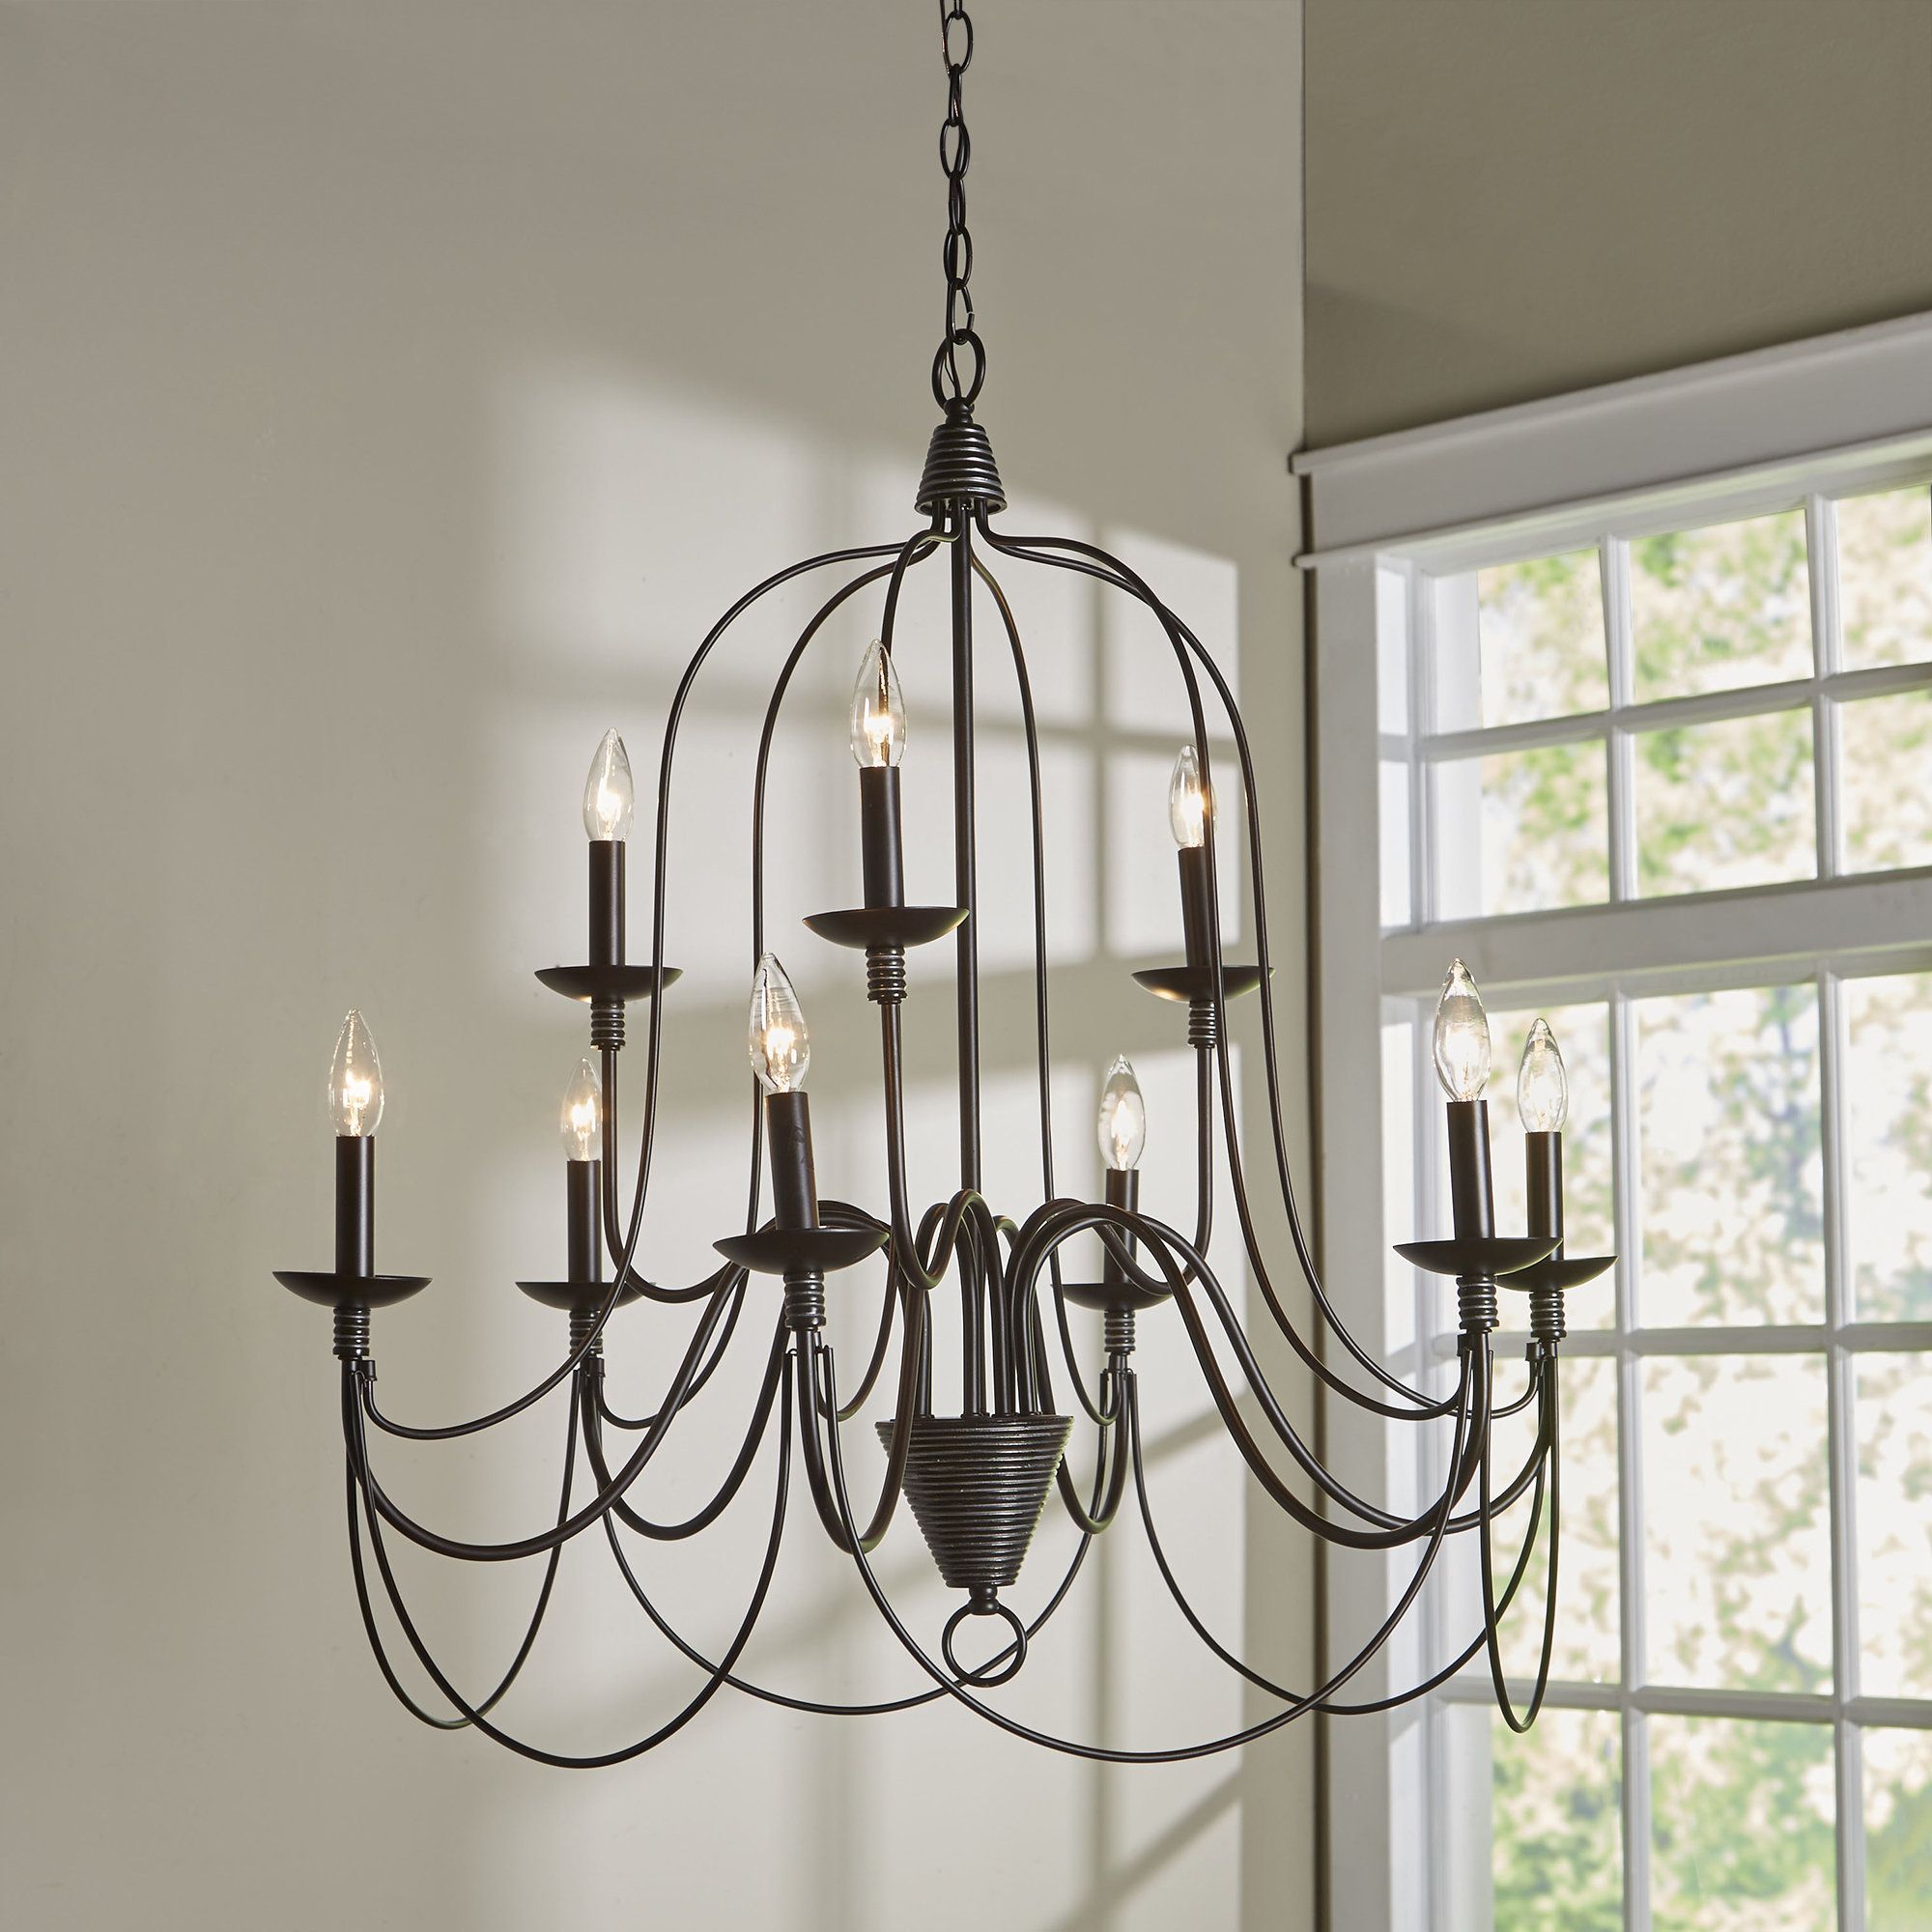 Most Current Watford 9 Light Candle Style Chandelier Intended For Watford 9 Light Candle Style Chandeliers (View 1 of 25)